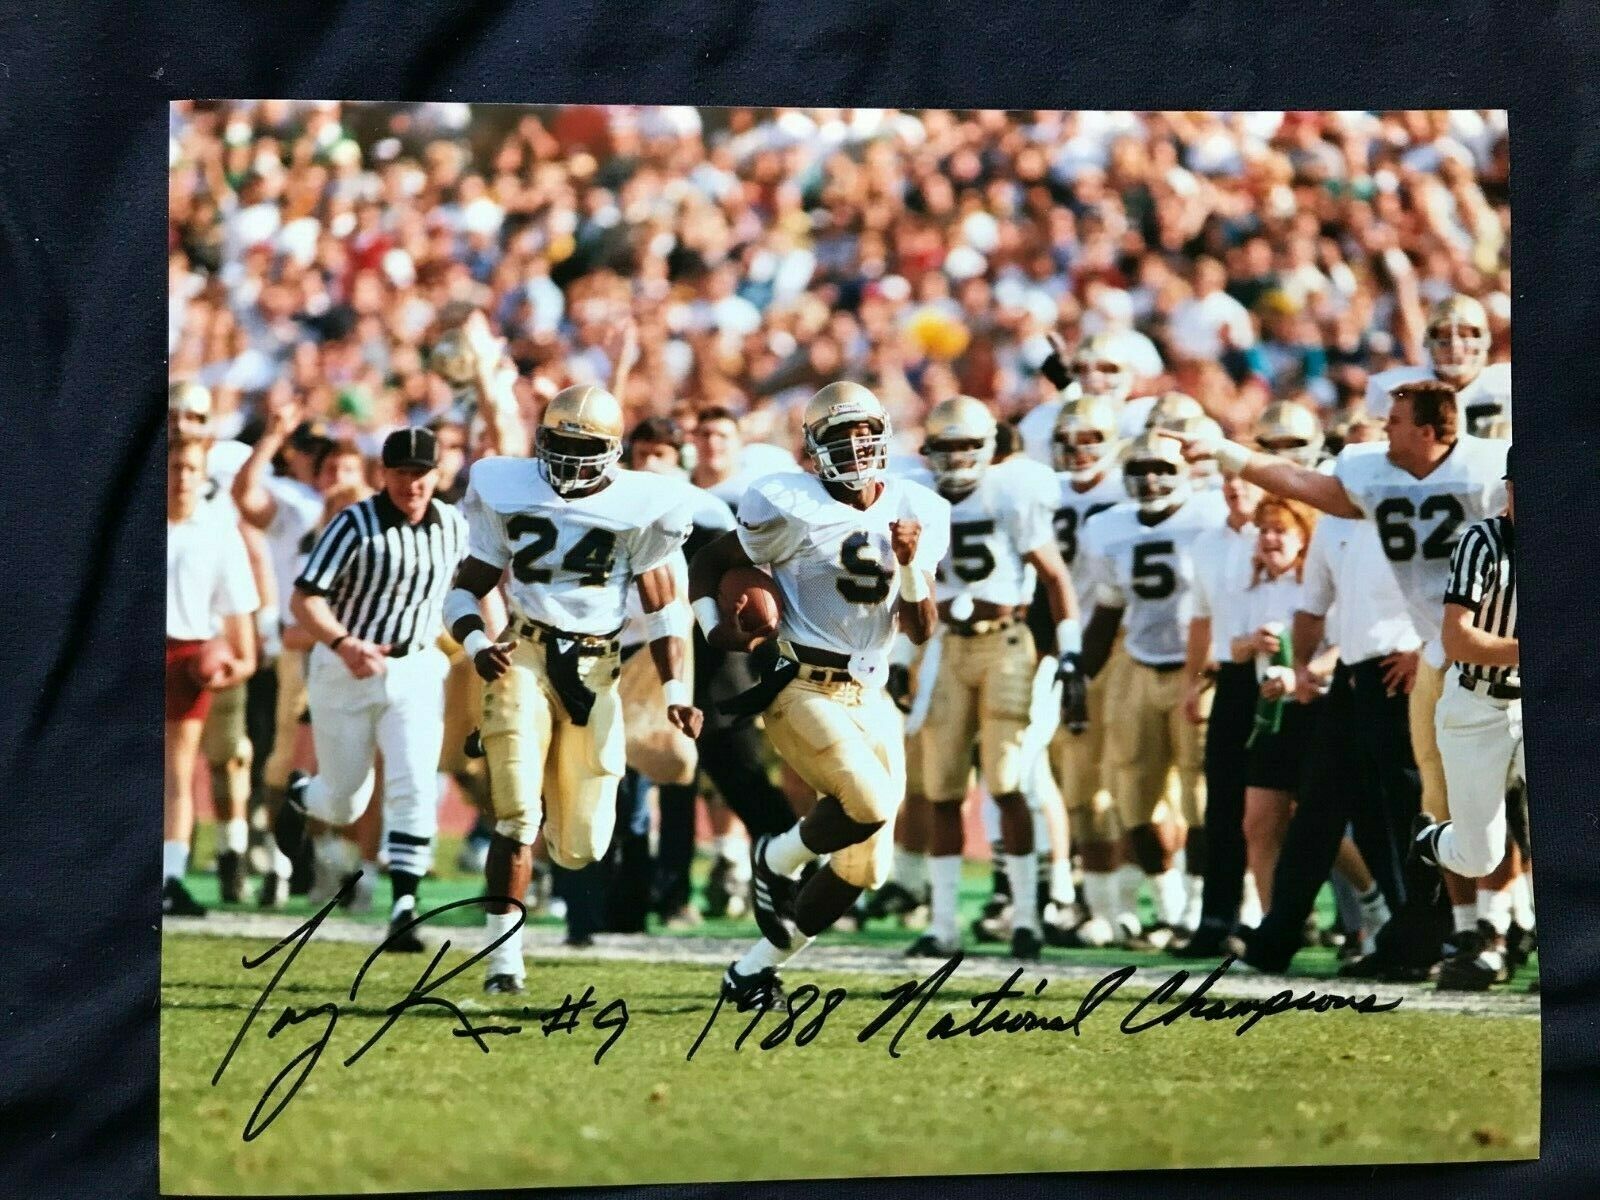 Tony Rice On A 65-yard Touchdown Run In 1988 Vs Usc Signed And Inscribed 11x14.